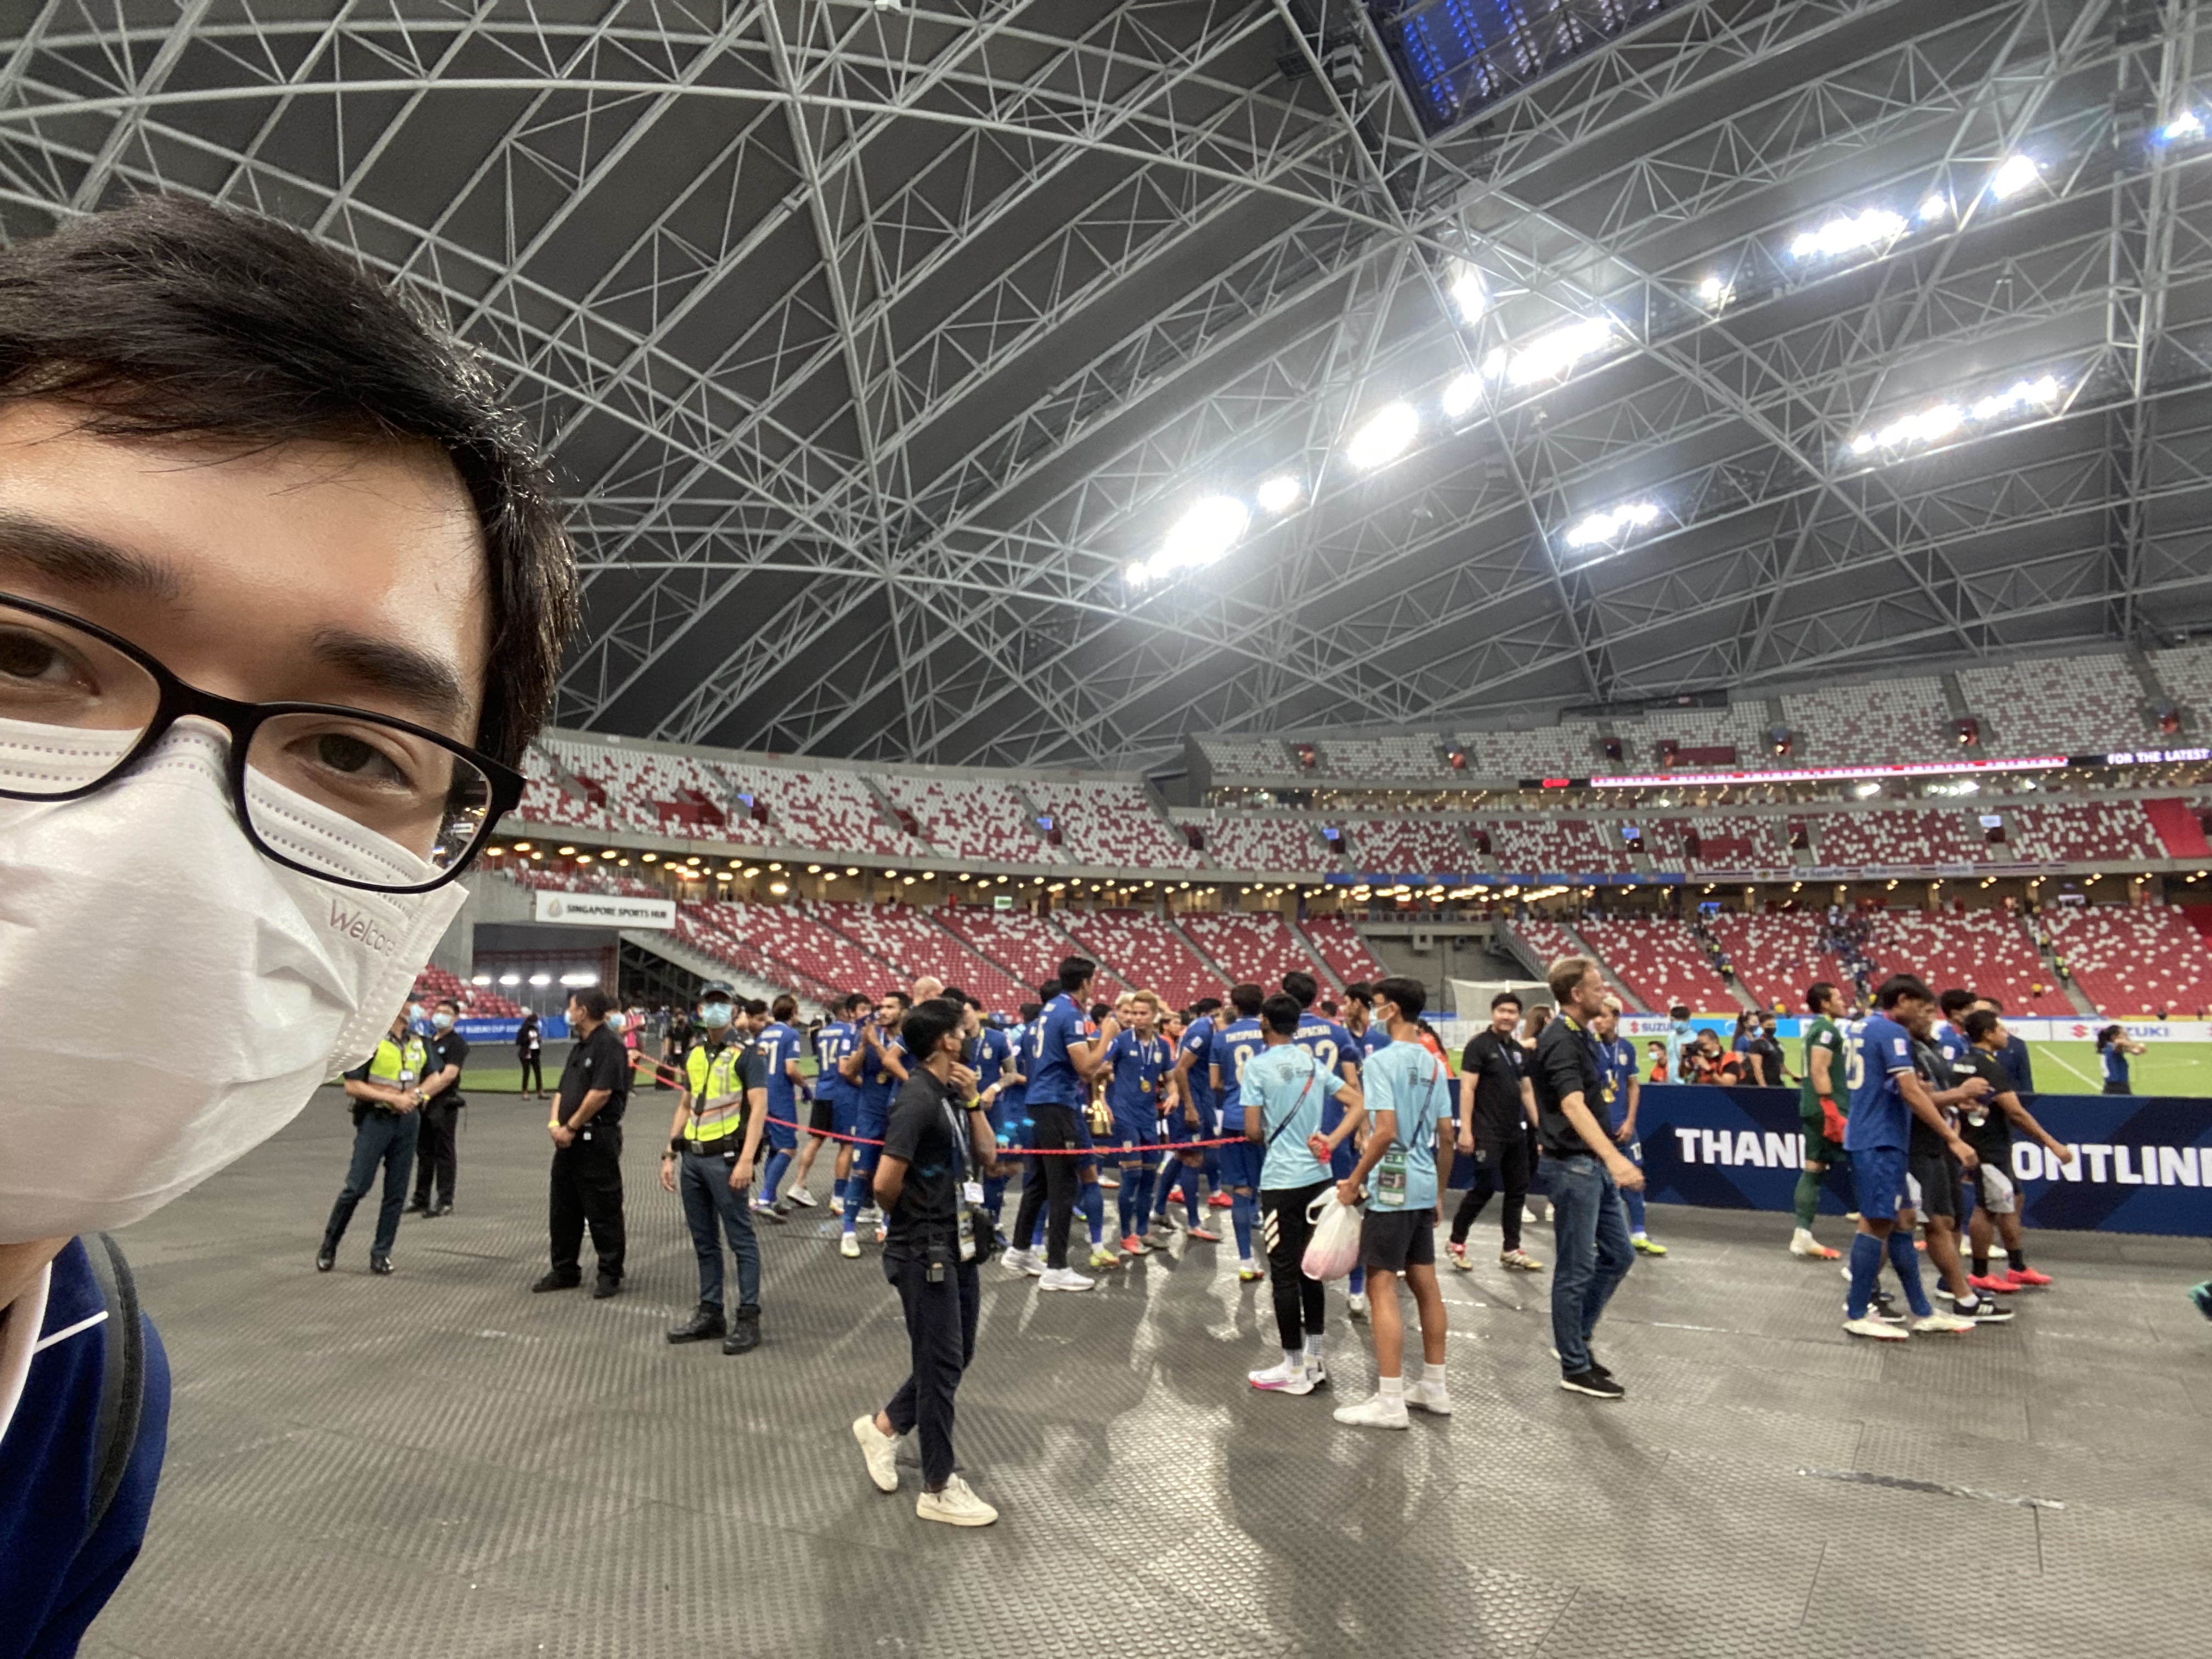 Me in front of the Thailand national football team